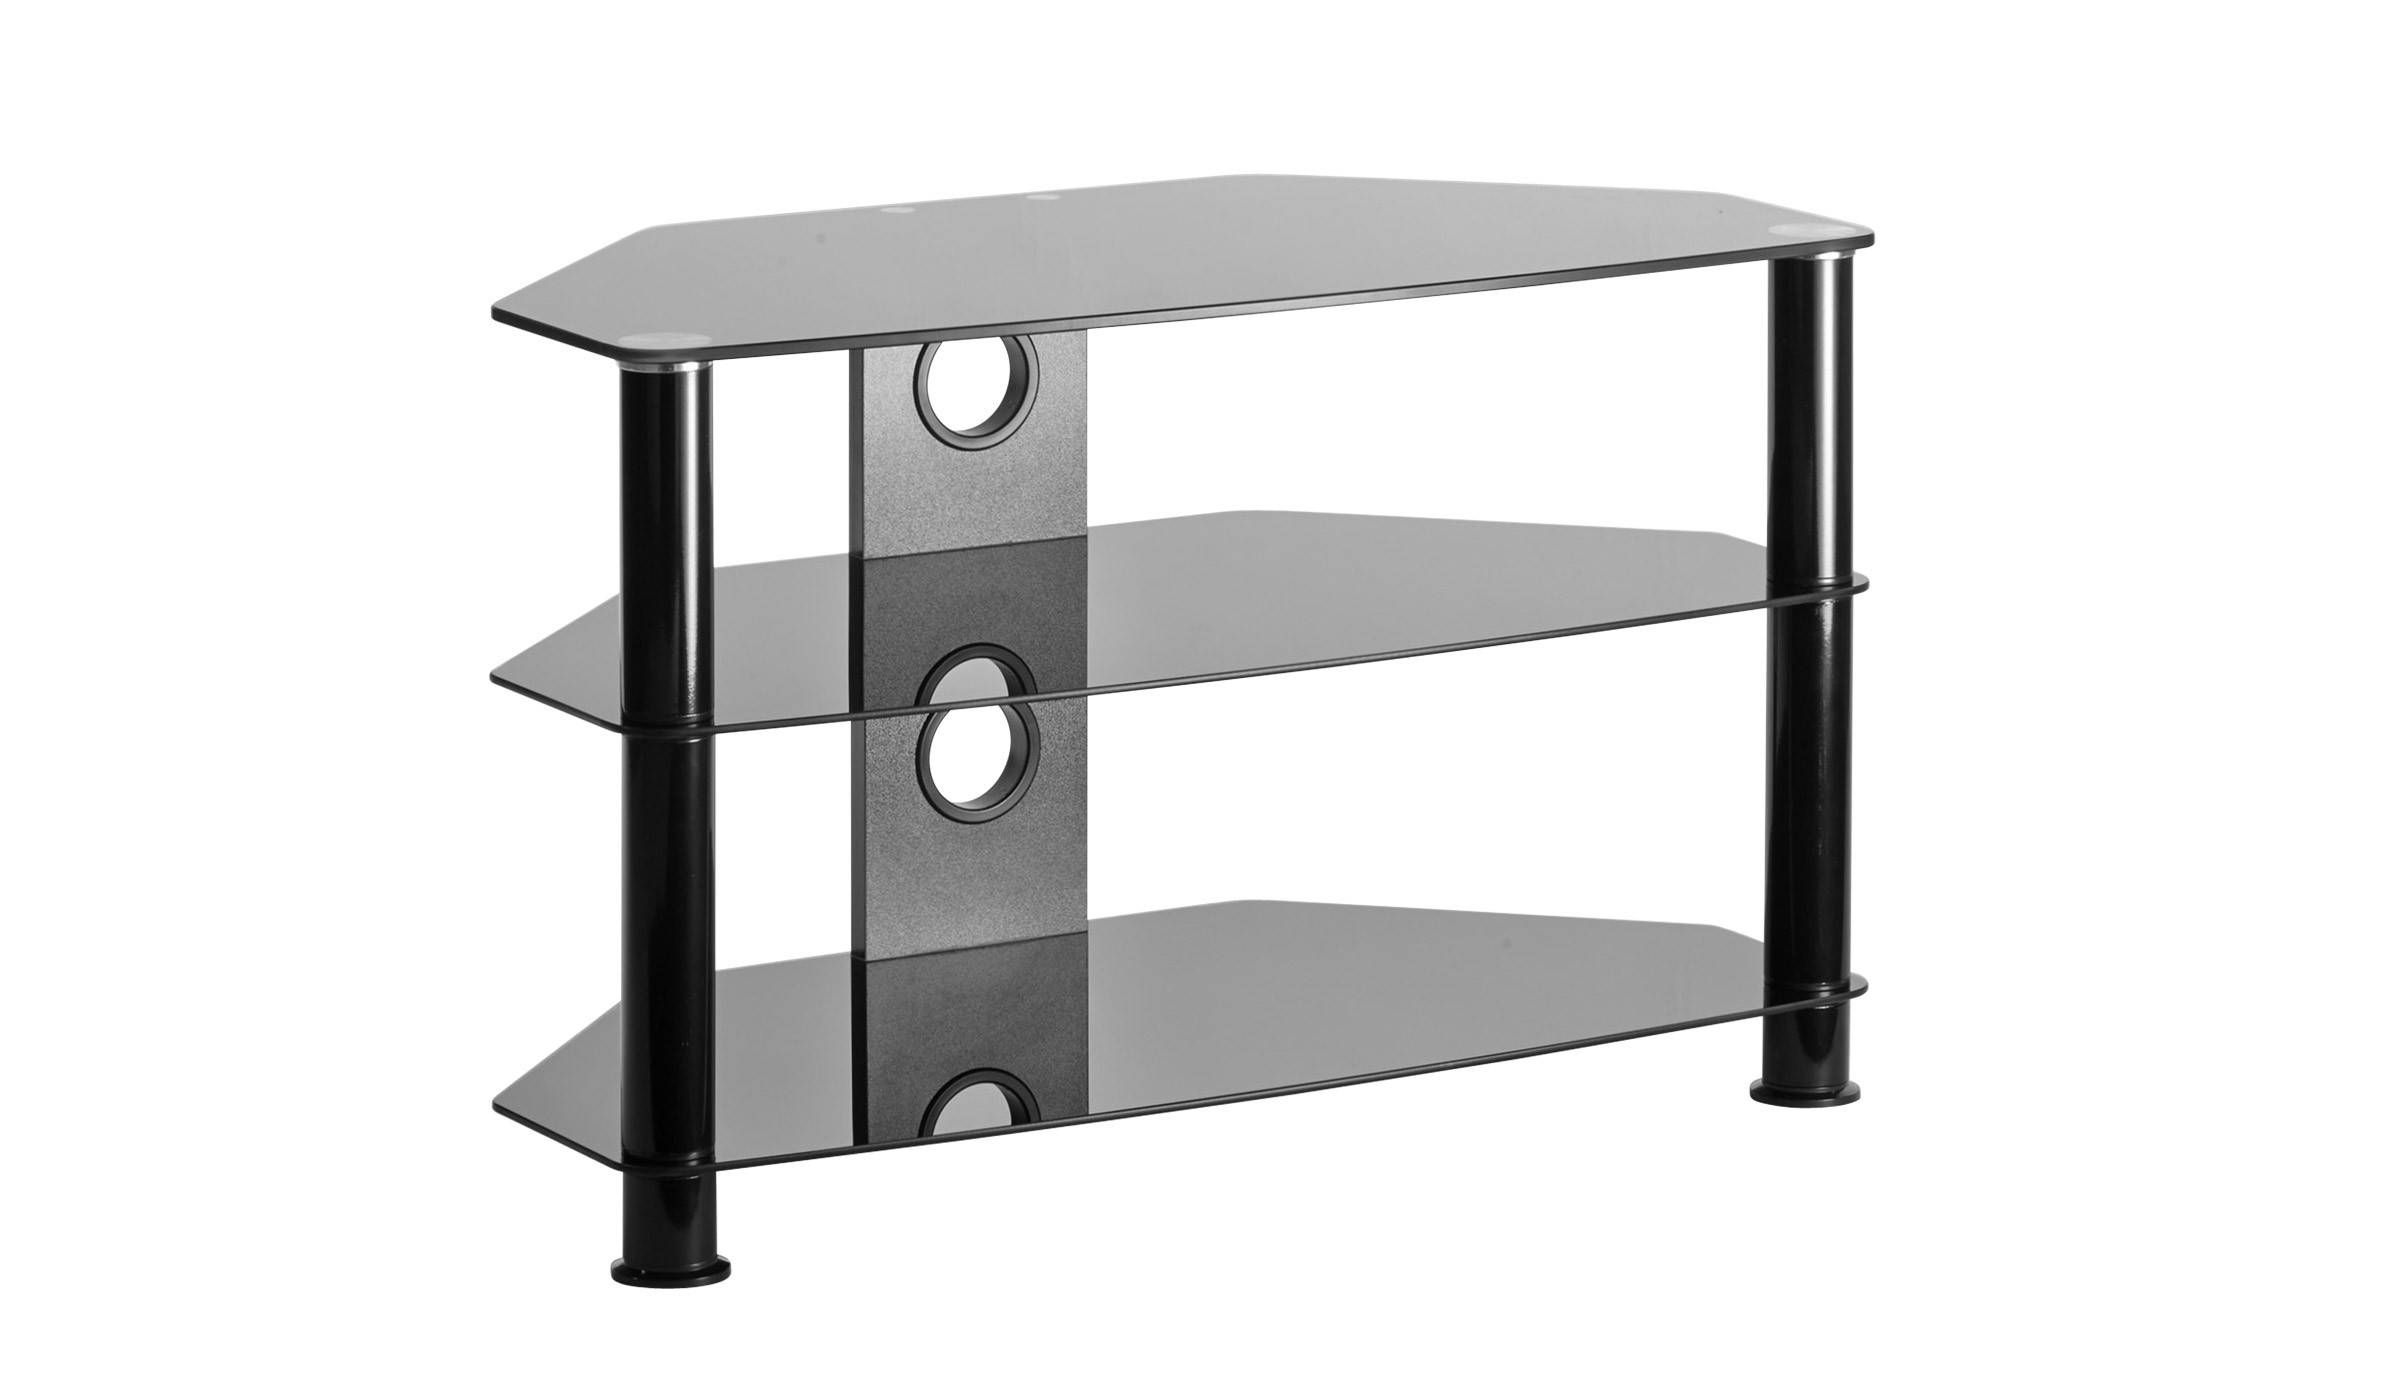 Black Glass Corner Tv Stand Up To 37 Inch Tv | Mmt Db800 Regarding Black Glass Tv Stands (View 12 of 15)